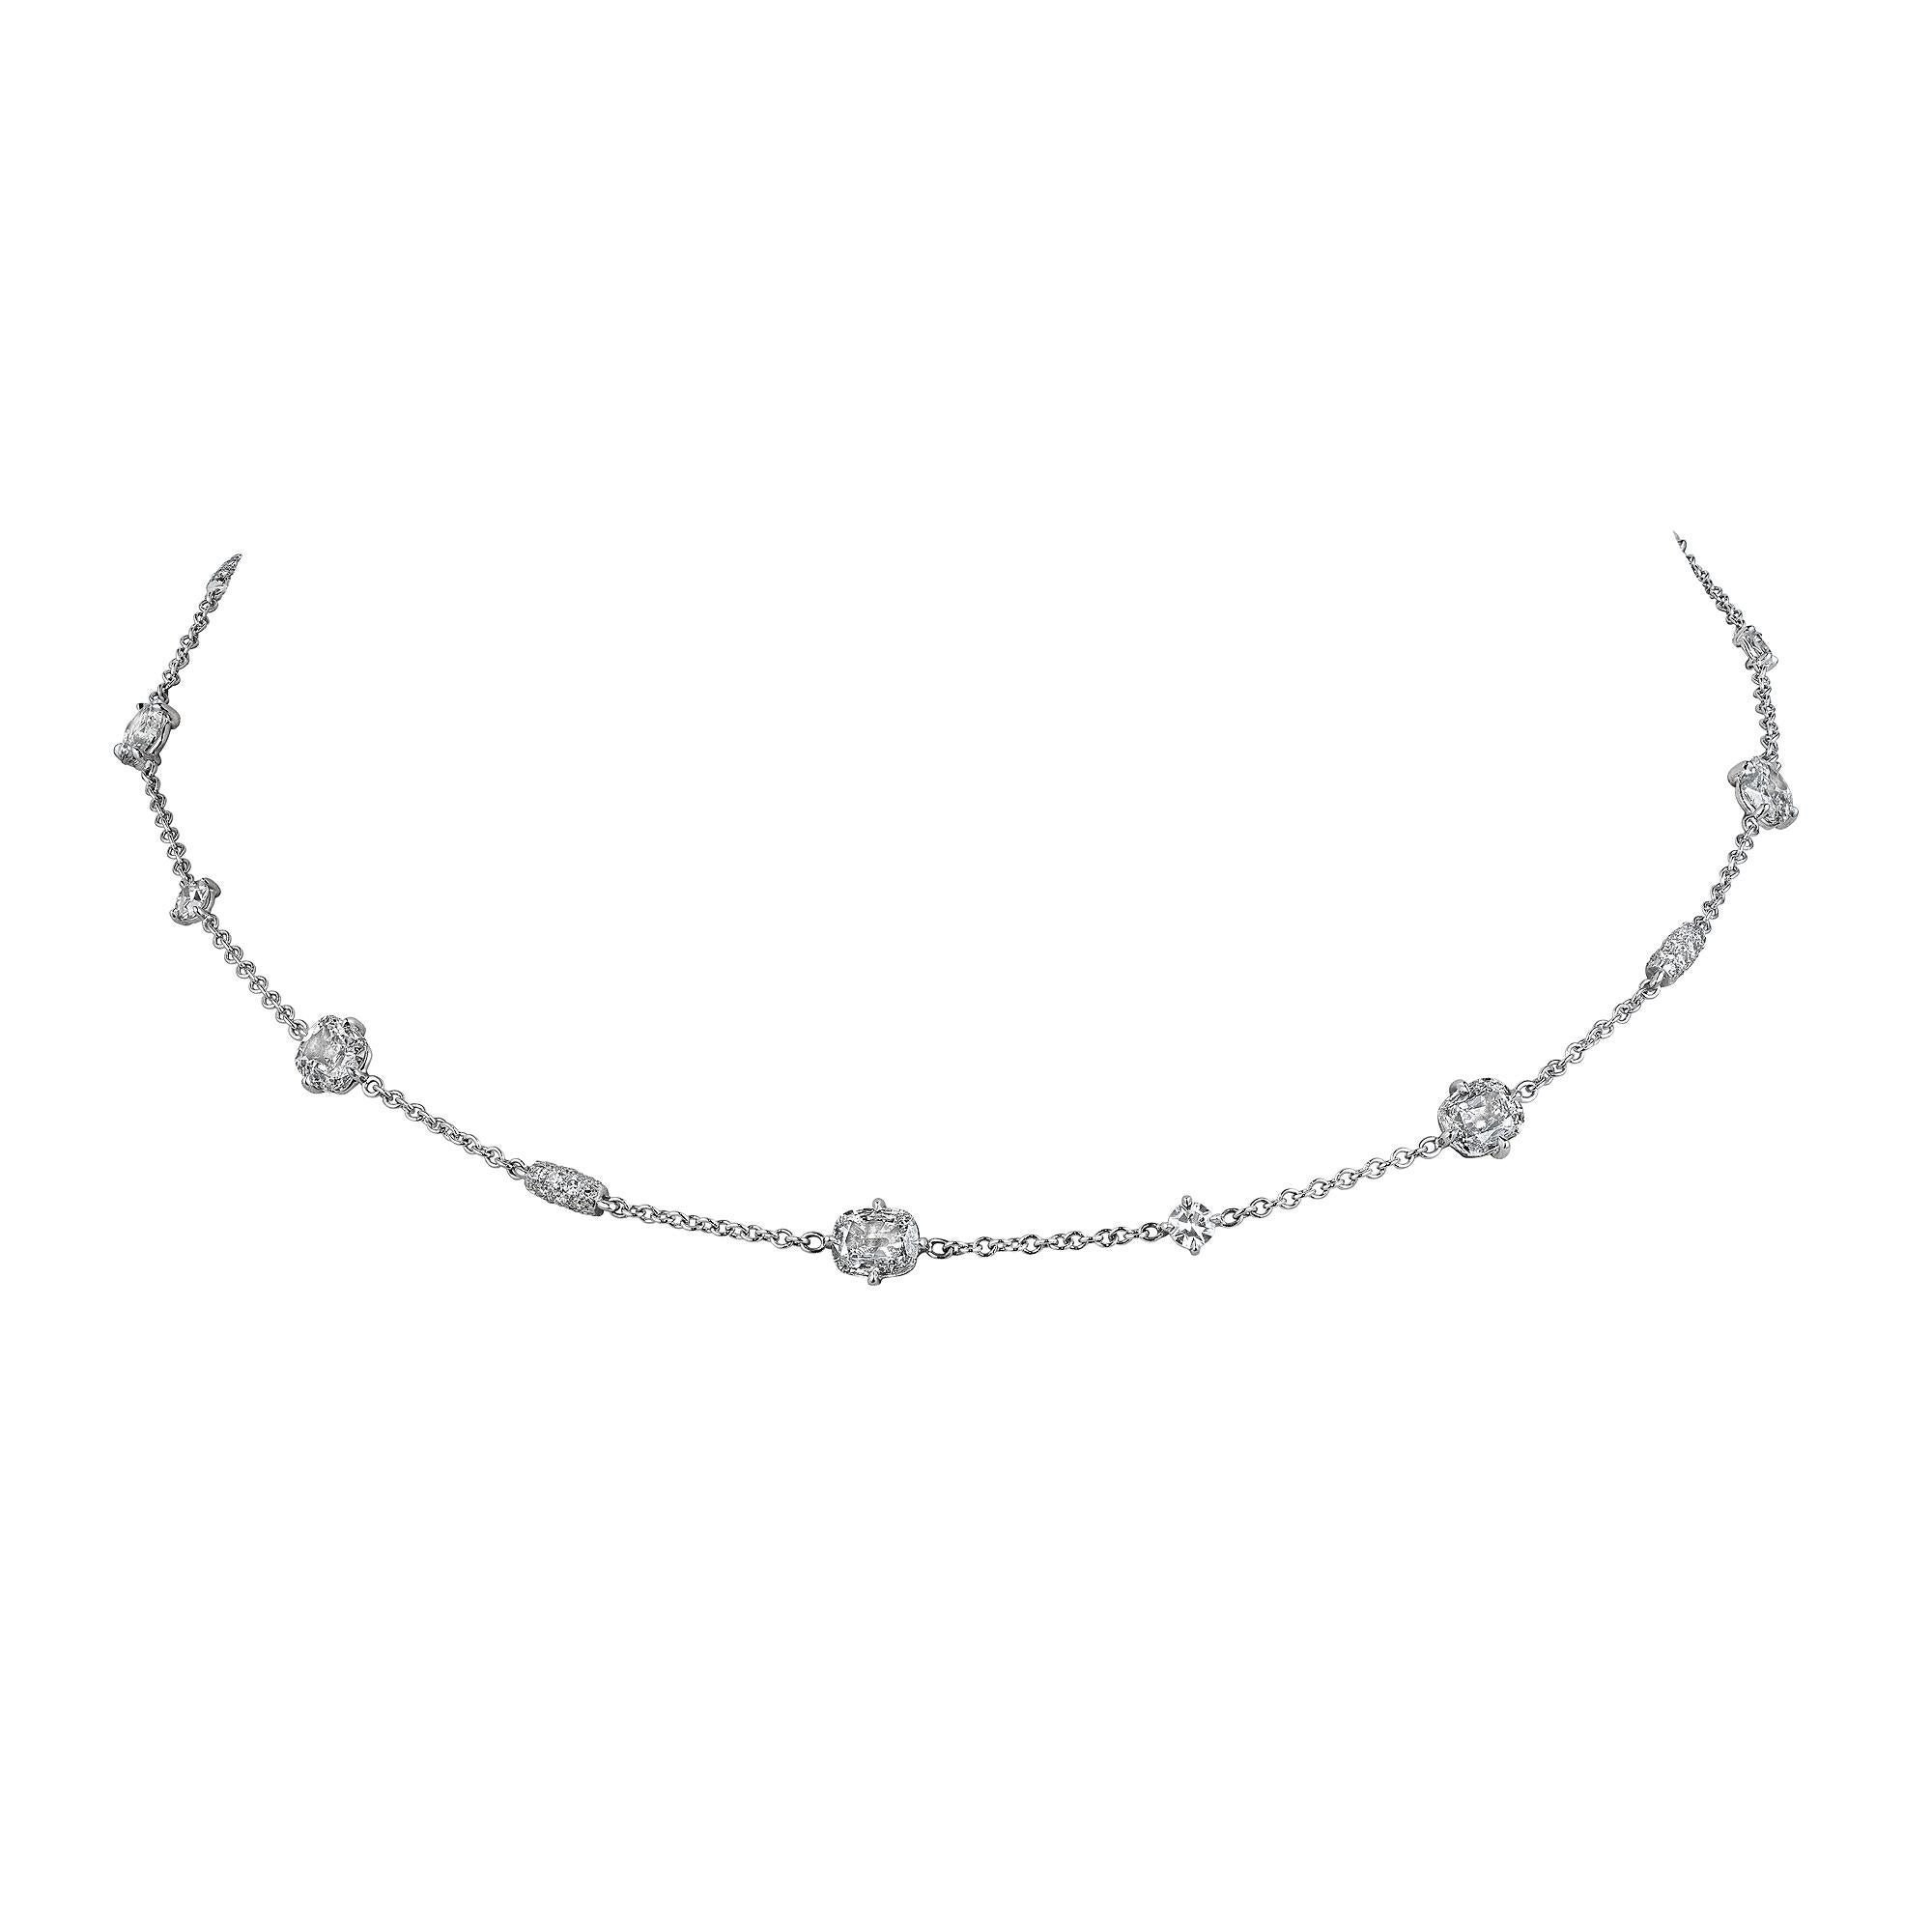 A rare and important collection of cushion cut diamonds dance gracefully together creating a one-of-a-kind necklace that is a musical masterpiece. Designed and handmade by Steven Fox, this platinum necklace features a symphony of seven cushion cut